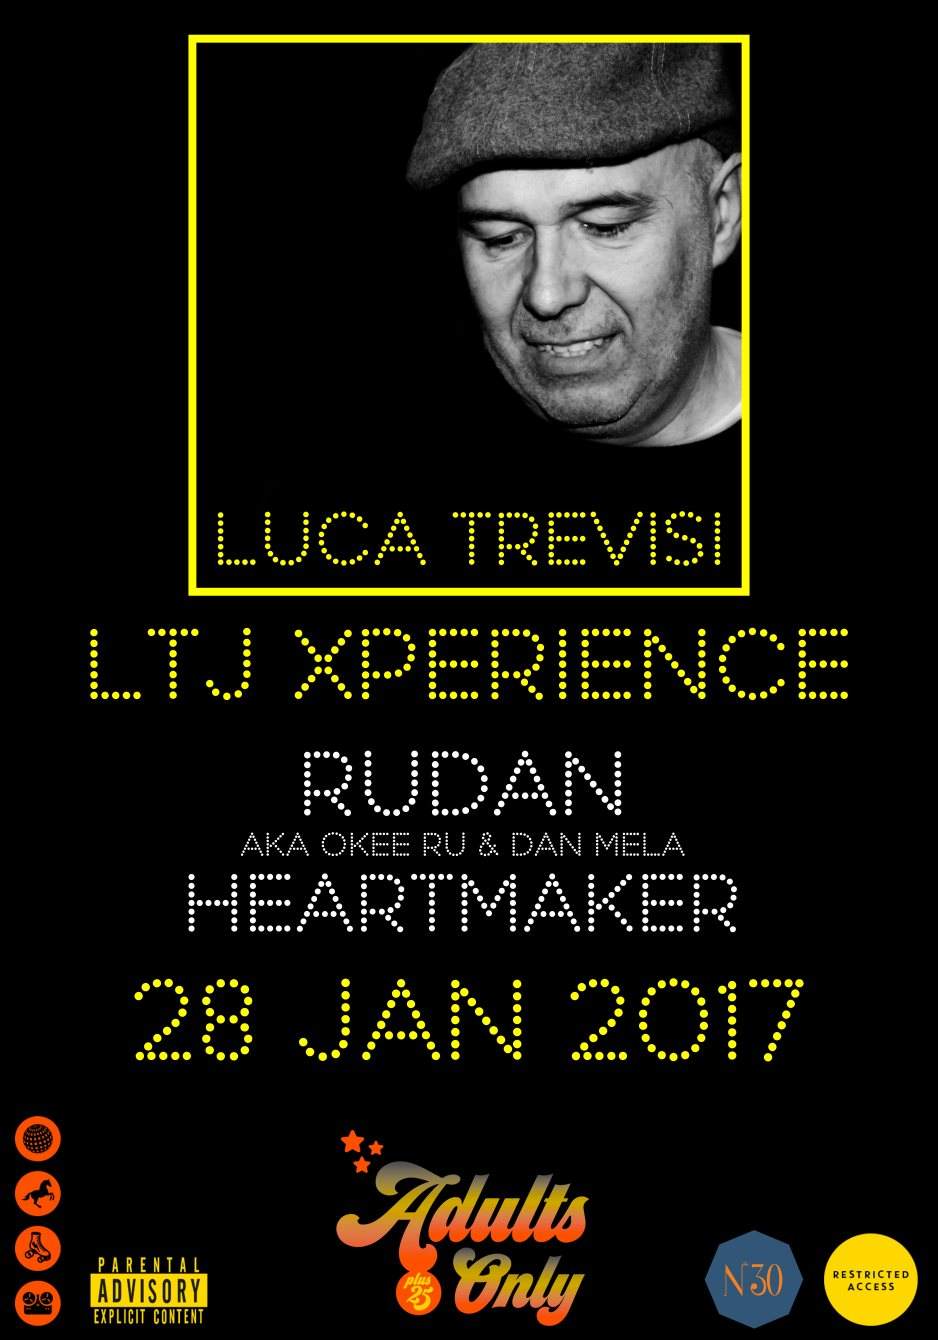 Adults Only 25 W/ LTJ Xperience, Rudan, Heartmaker - フライヤー裏